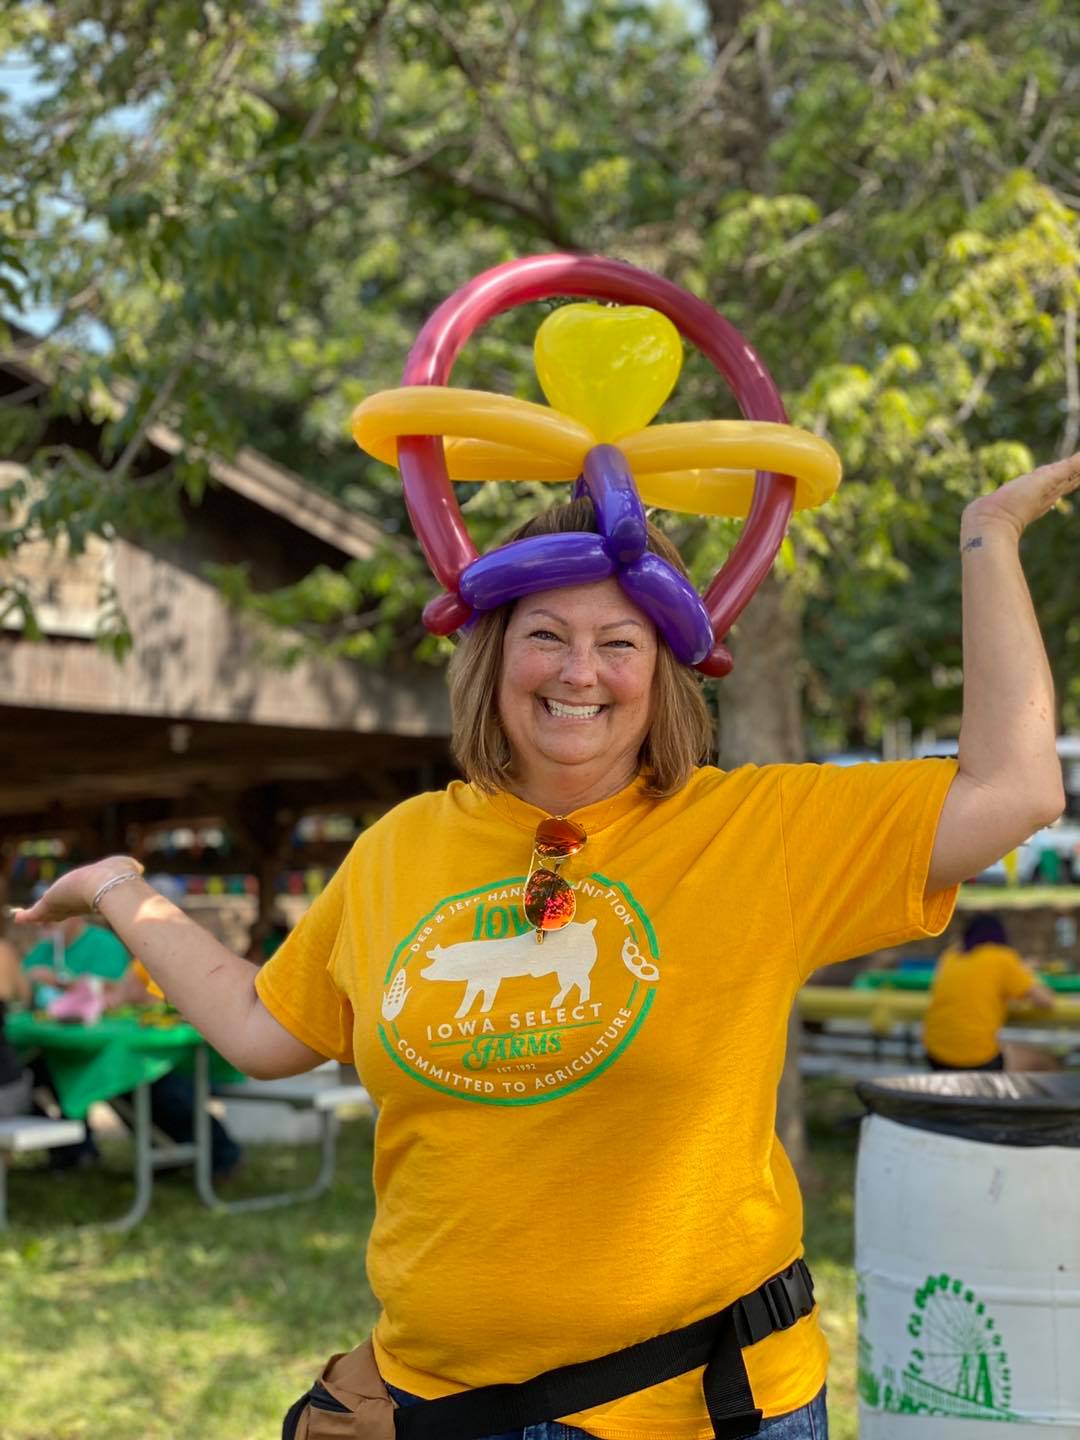 A woman poses while wearing a balloon hat.